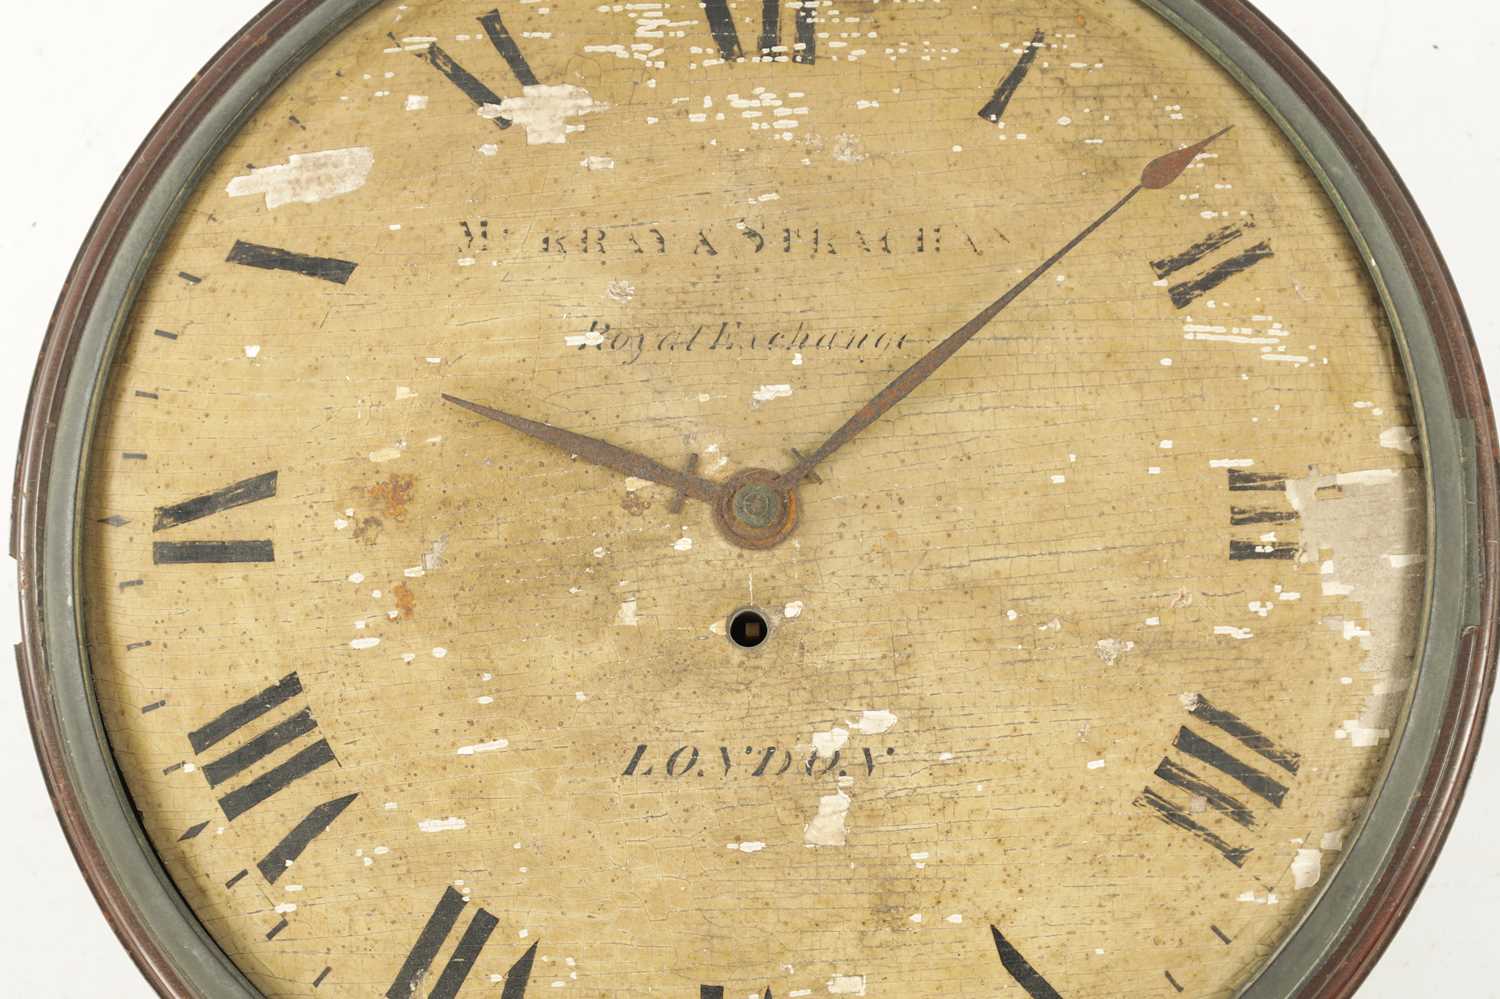 MURRAY & STRACHAN, ROYAL EXCHANGE, LONDON. A REGENCY 12” CONVEX WOODEN DIAL MAHOGANY BRASS INLAID DR - Image 3 of 7